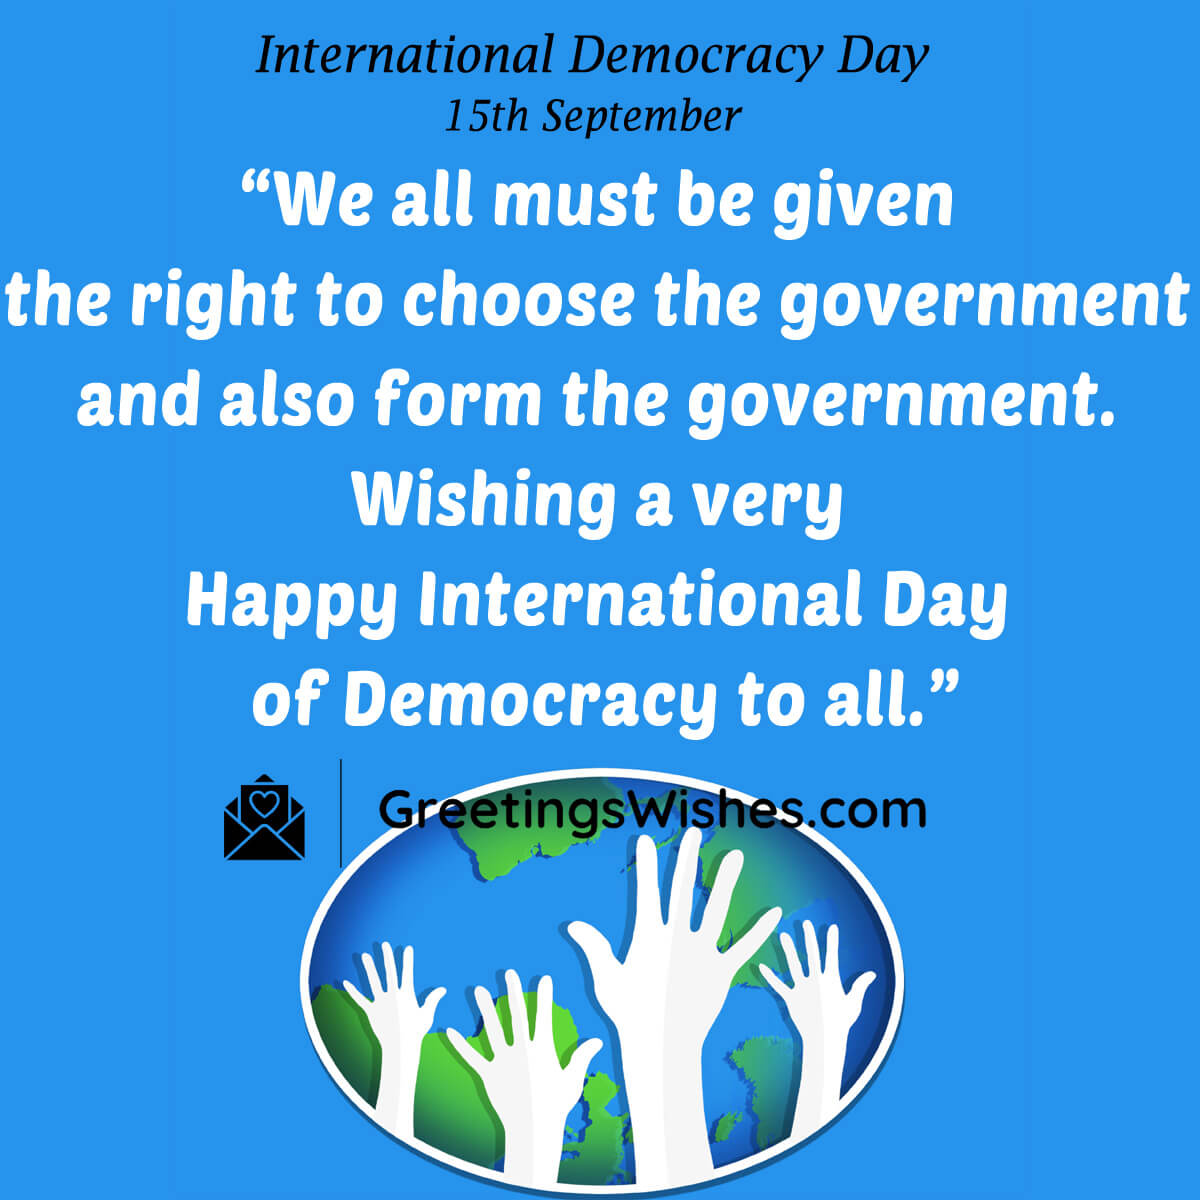 Democracy Day Greetings